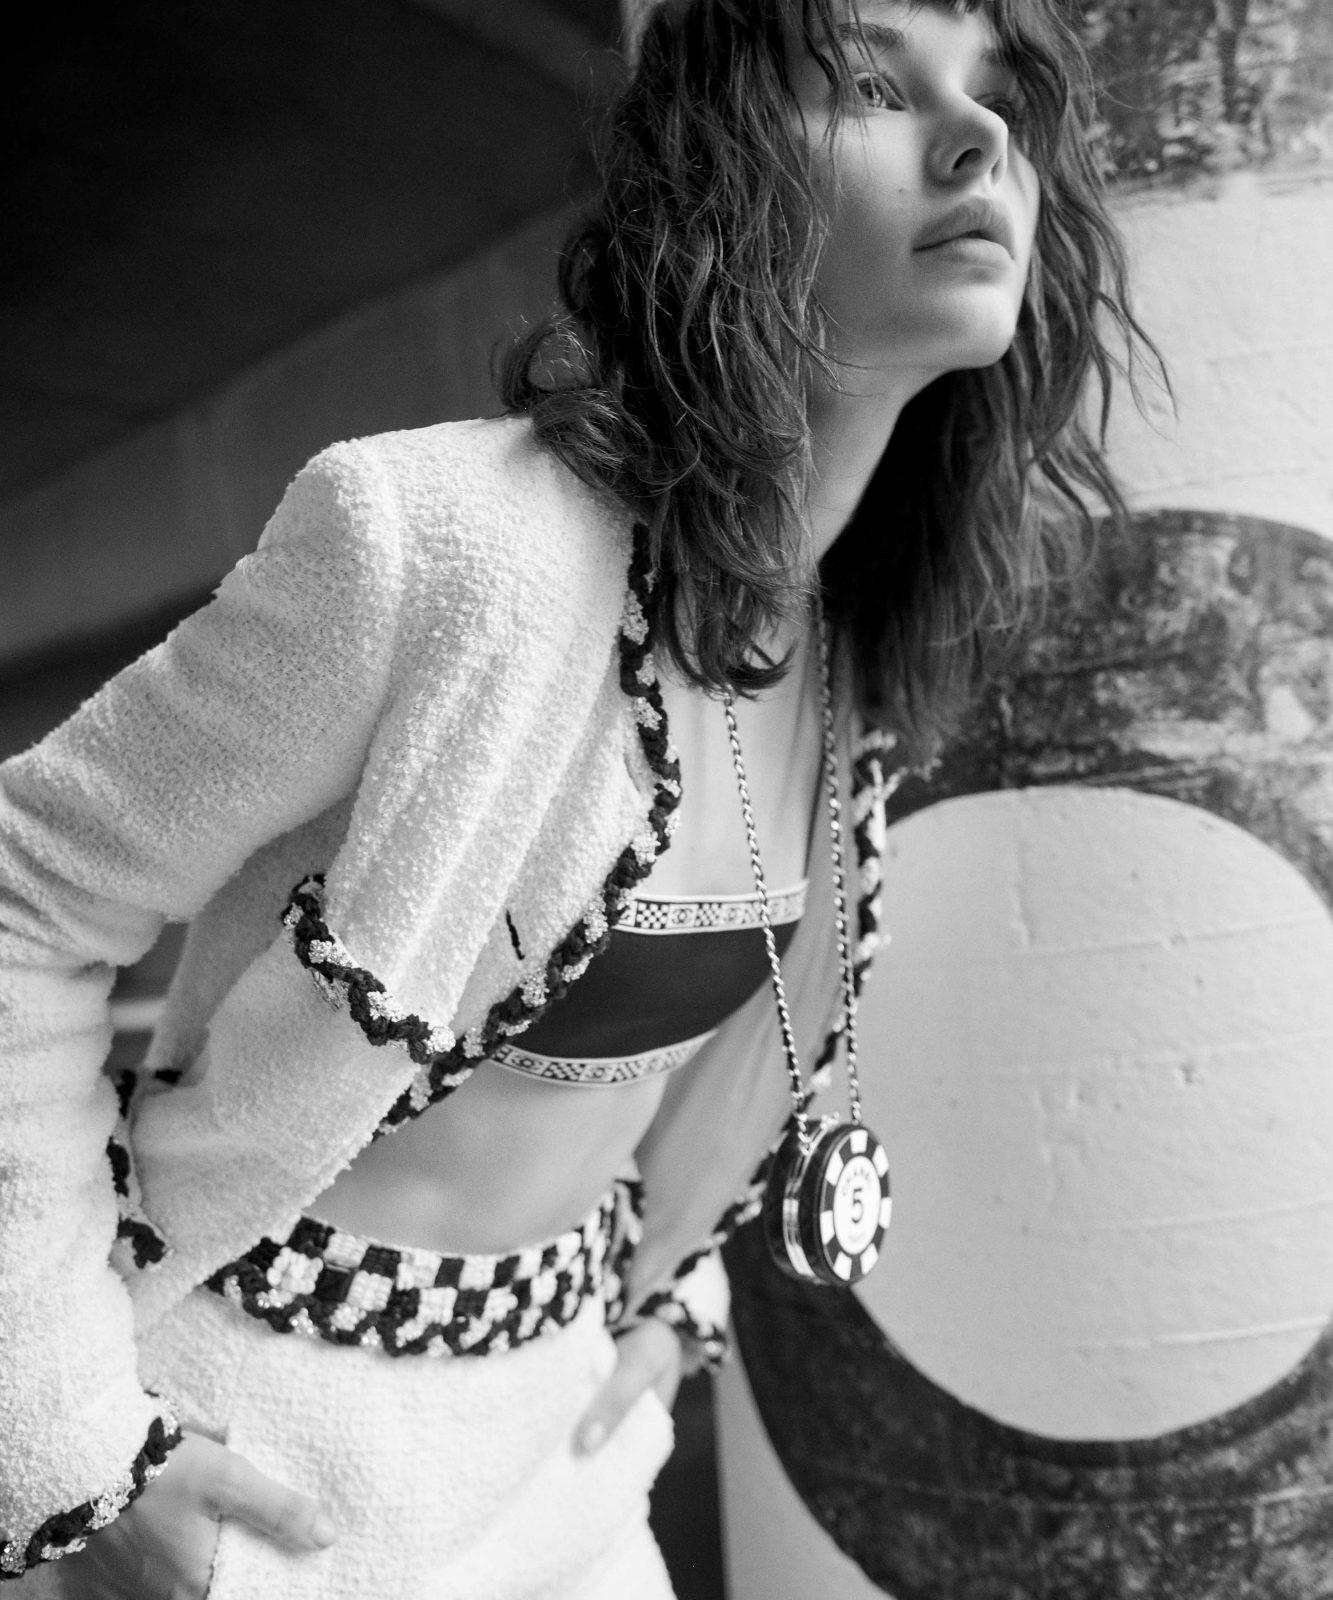 Cruise Control: Haute Living's Exclusive Editorial Featuring The Chanel Cruise 2022/23 Collection